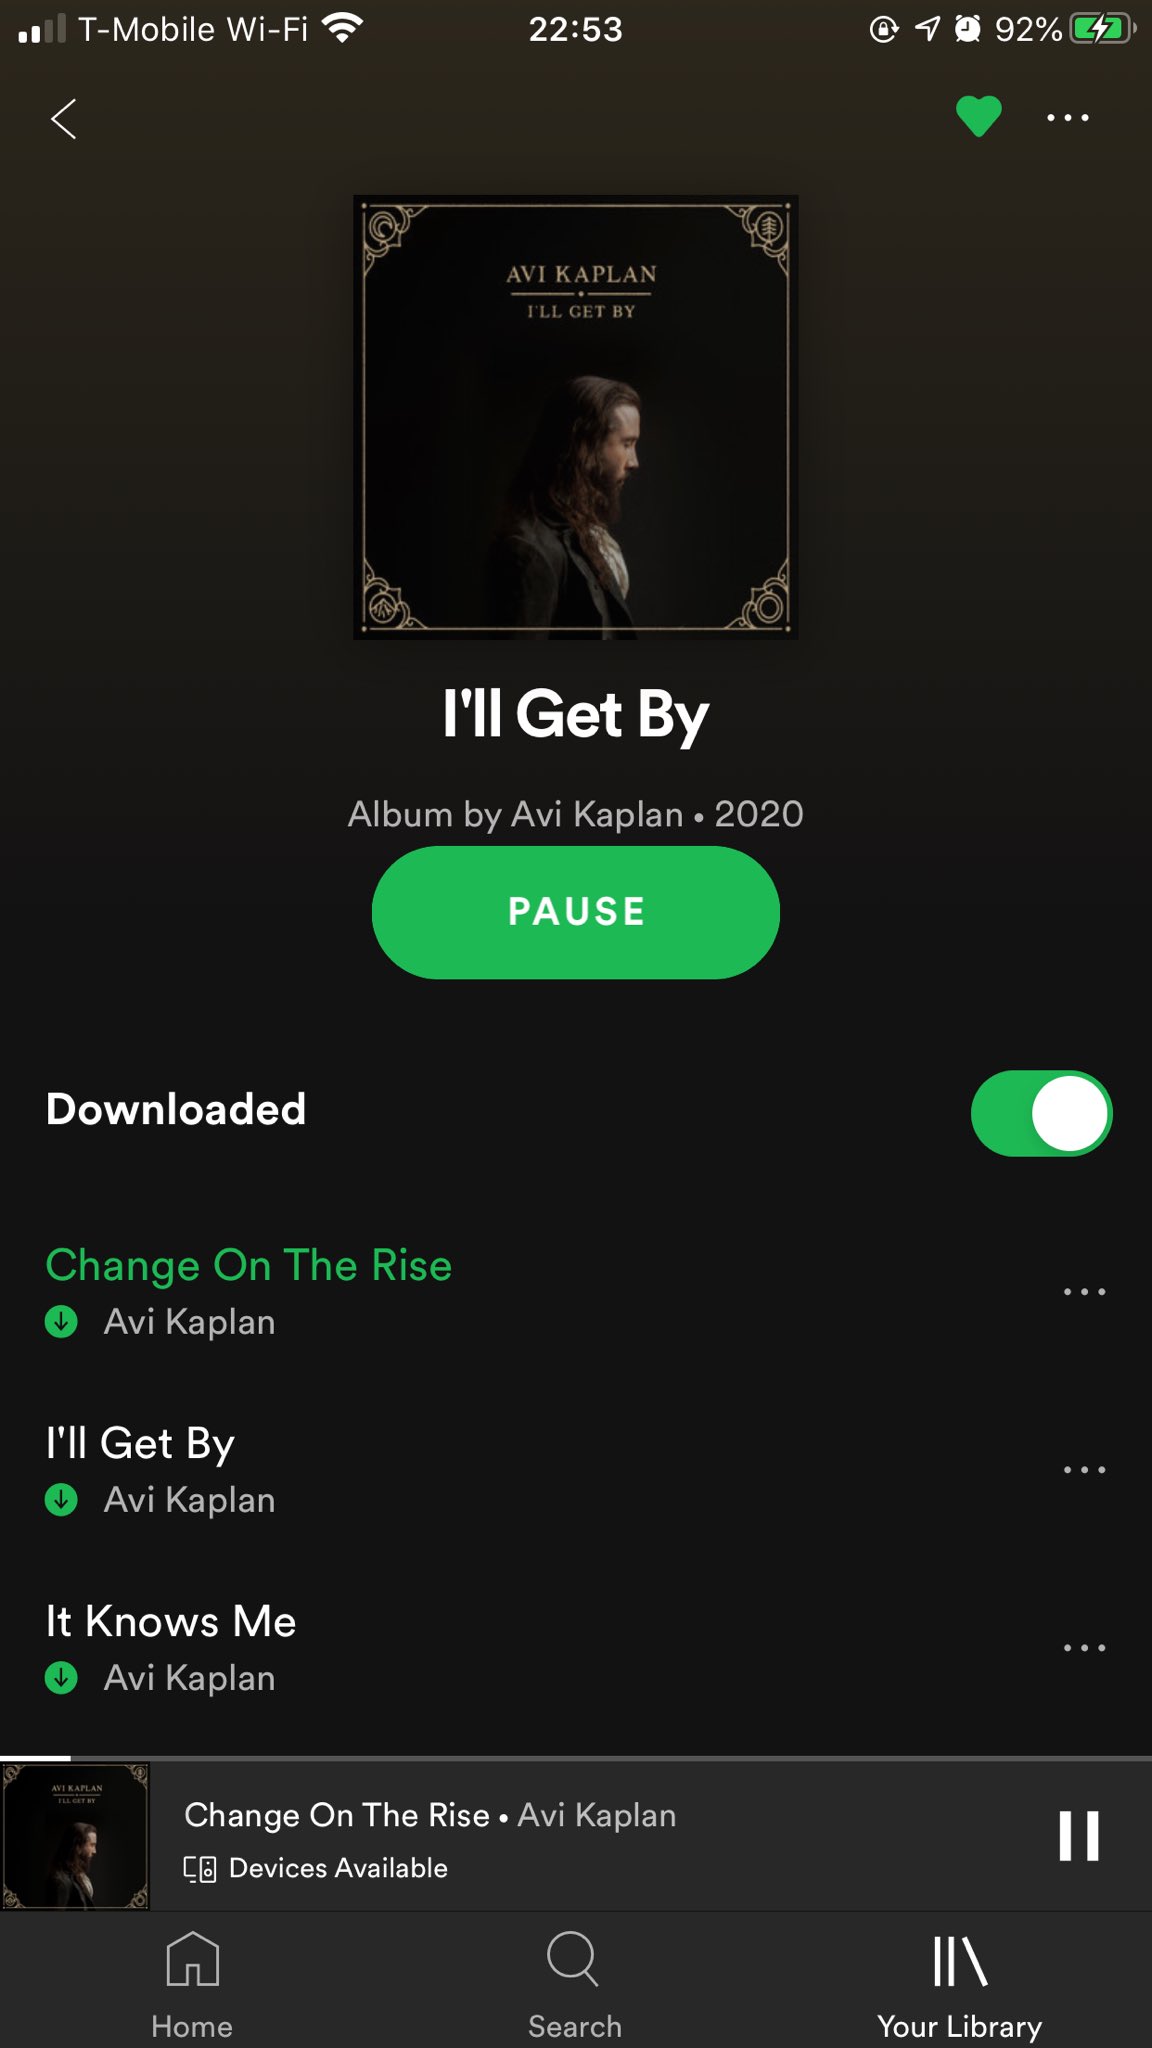 Avi Kaplan on Twitter: "I'll Get By EP is out now! https://t.co/kzVsjrRsQF / Twitter